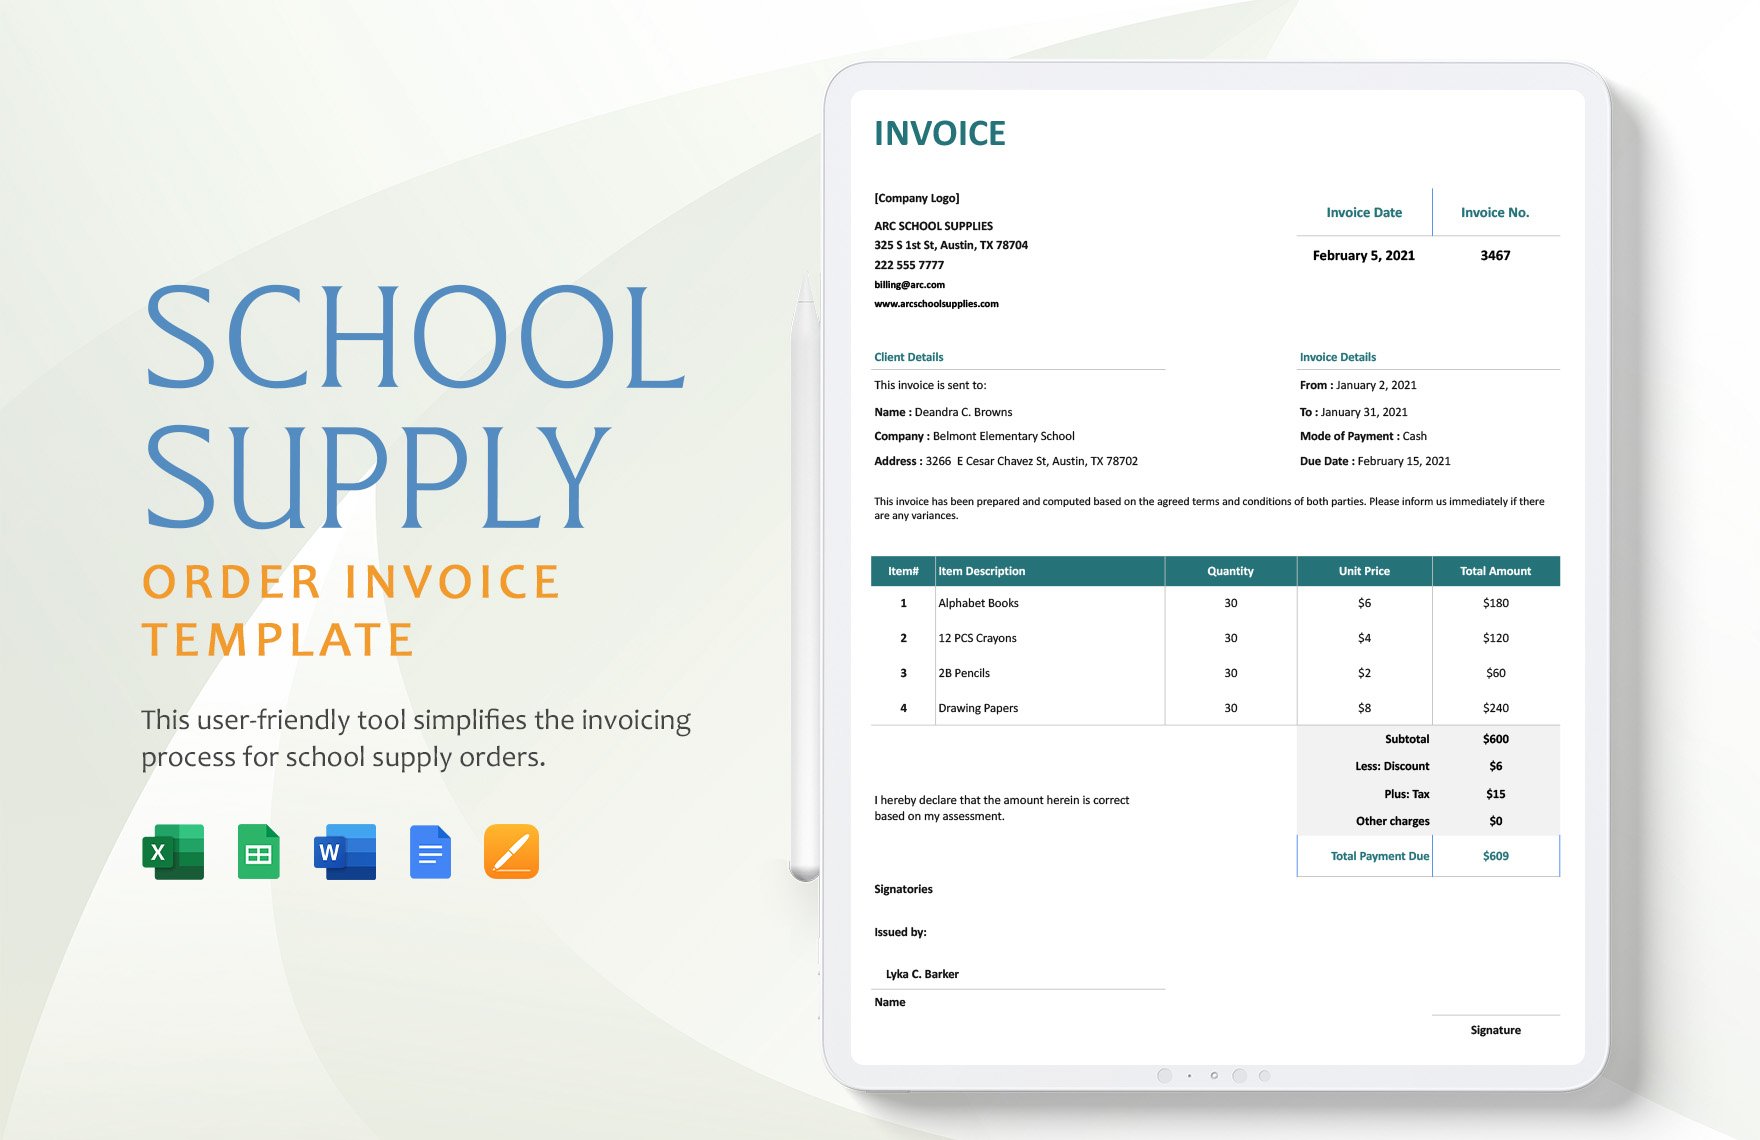 Free School Supply Order Invoice Template in Word, Google Docs, Excel, Google Sheets, Apple Pages